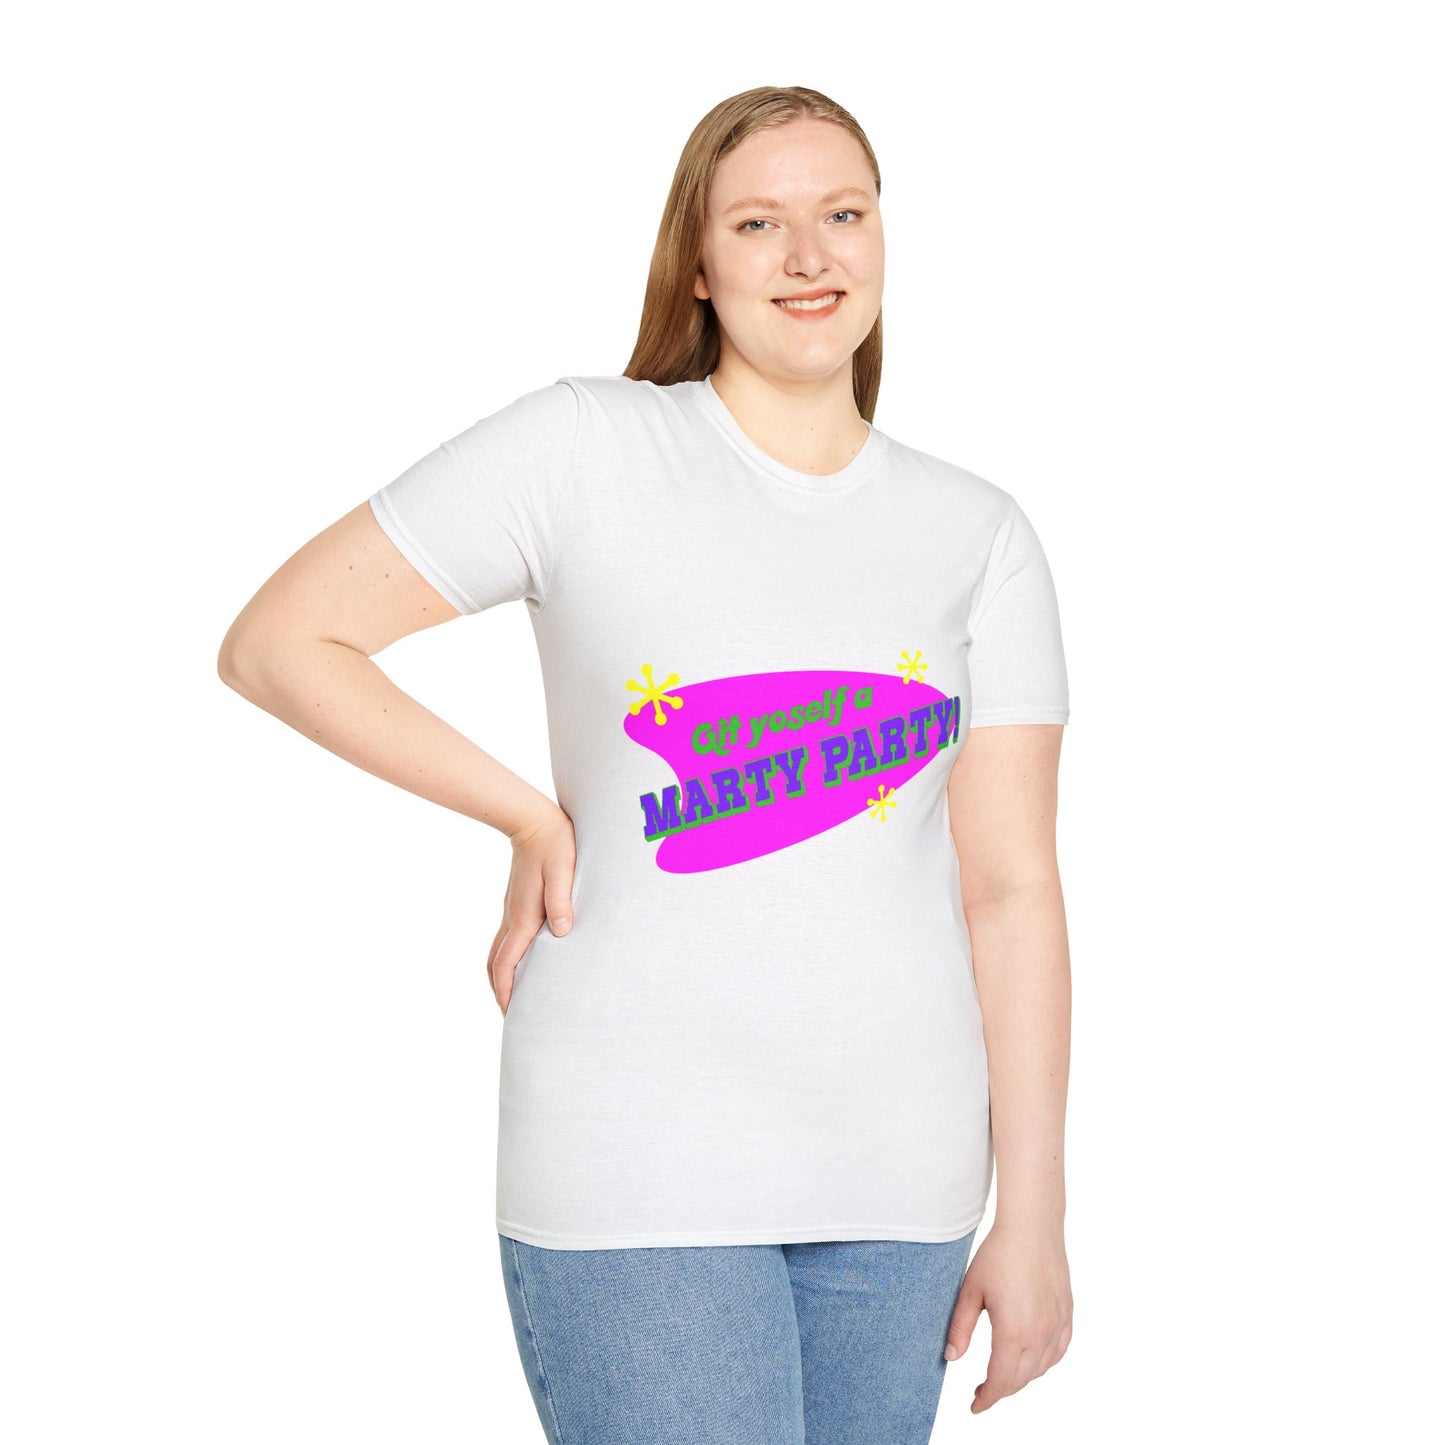 Marty Party T-Shirt